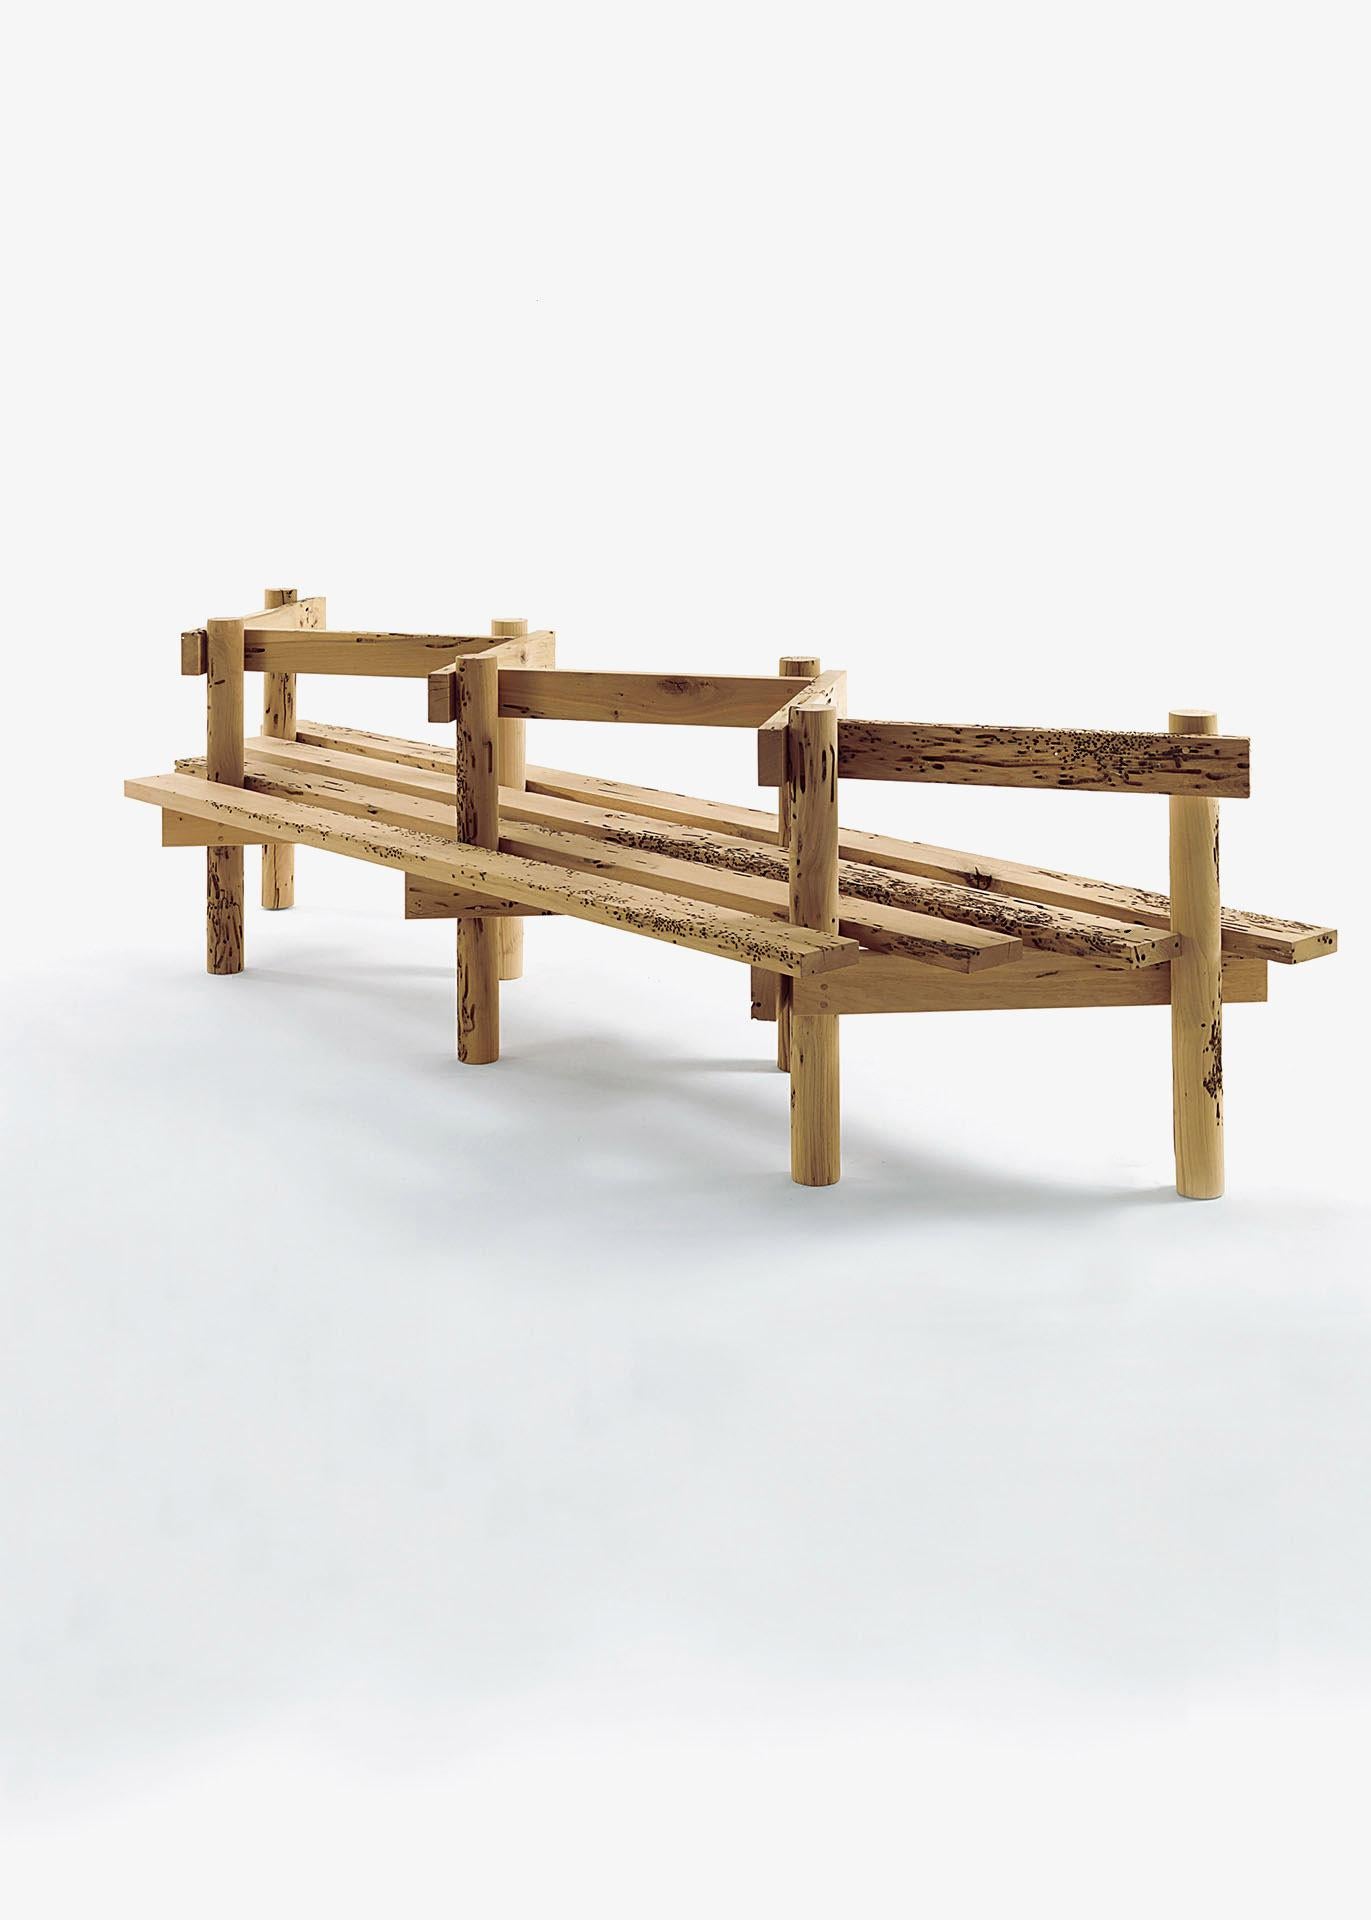 Bench completely made in solid Briccola wood. Backrest in zig zag form that defines the seats on both sides.

Designed by Michele De Lucchi and made in Italy.